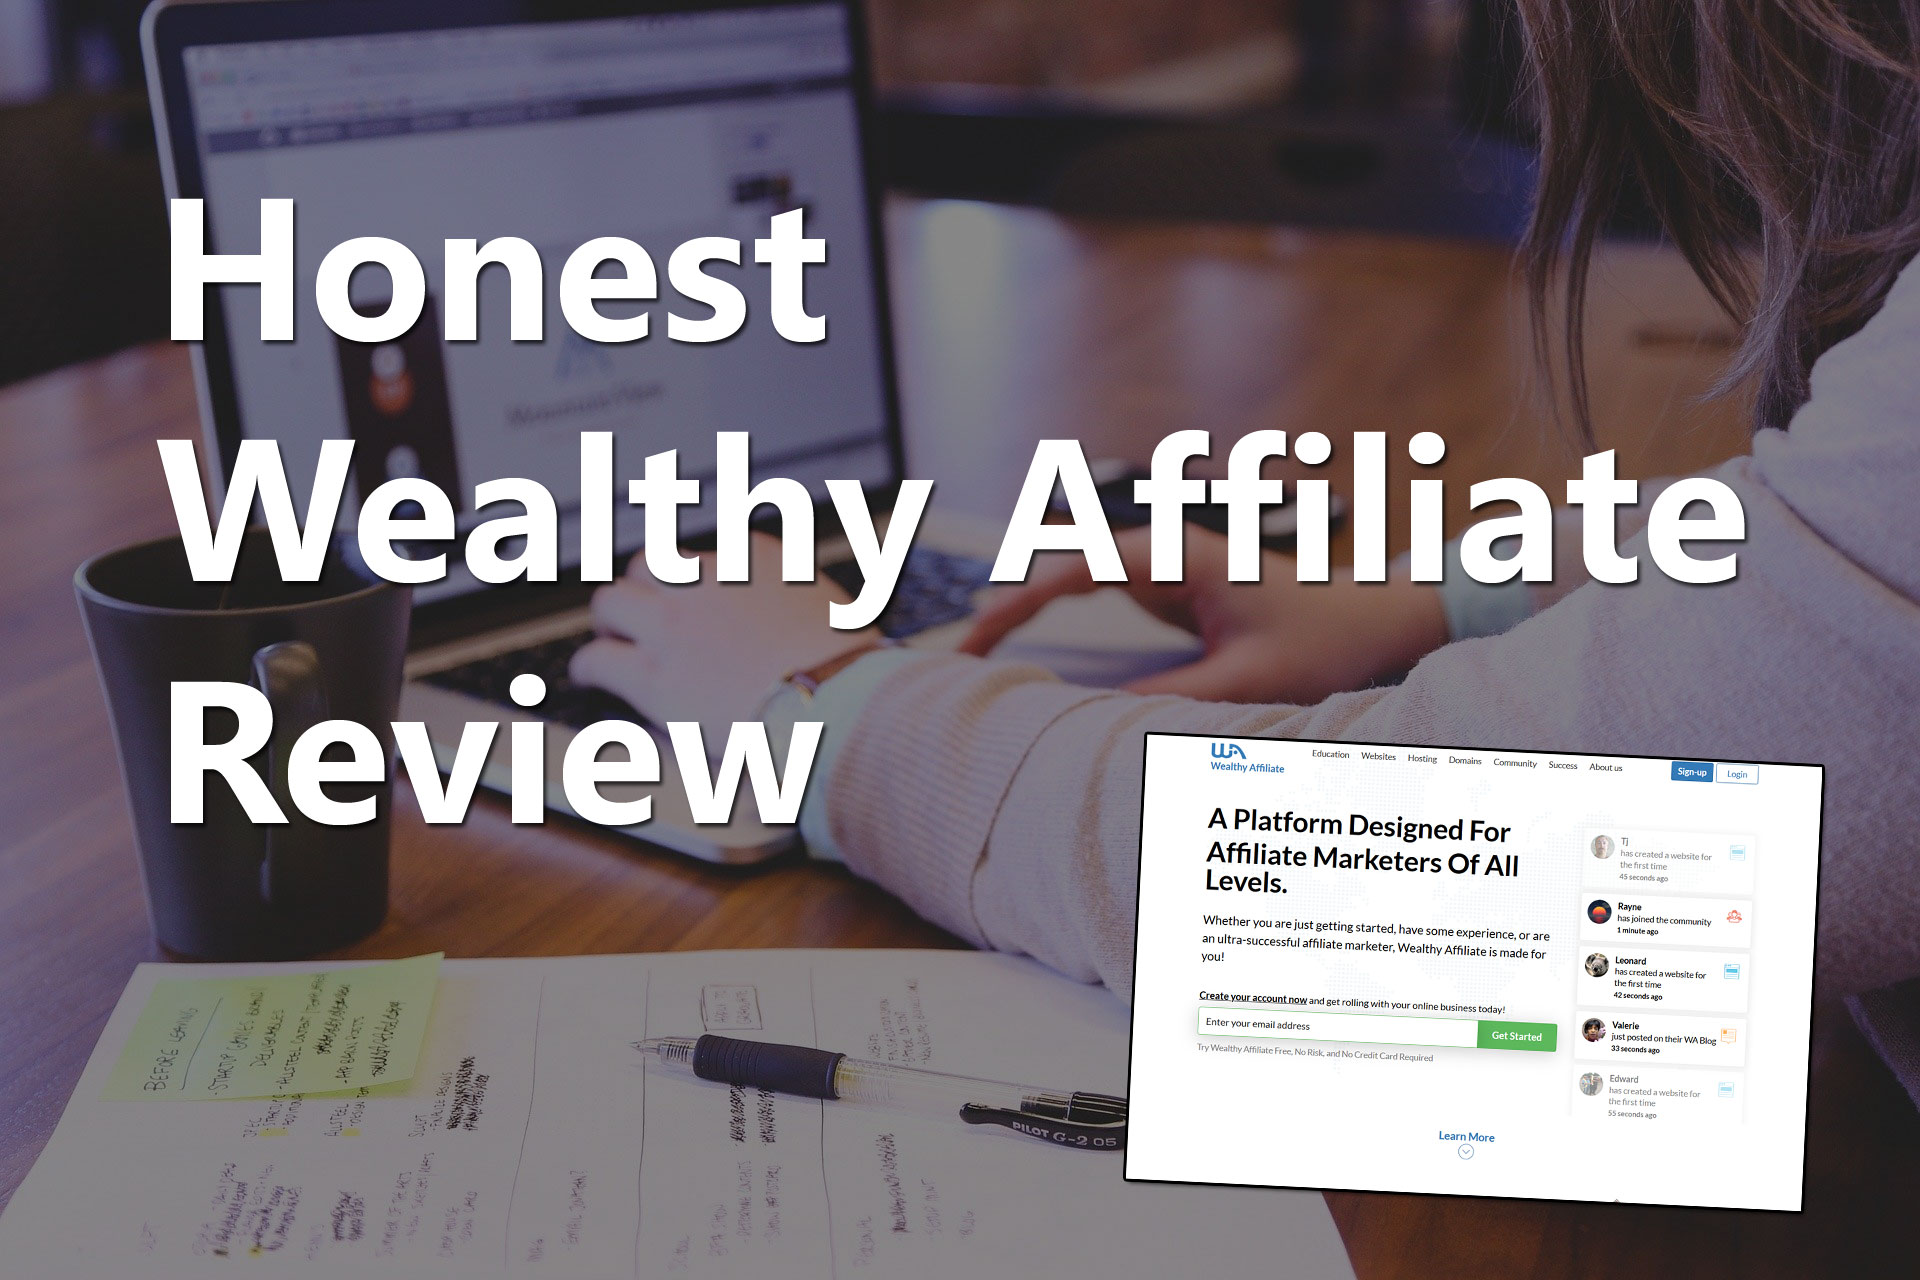 Honest Wealthy Affiliate Review